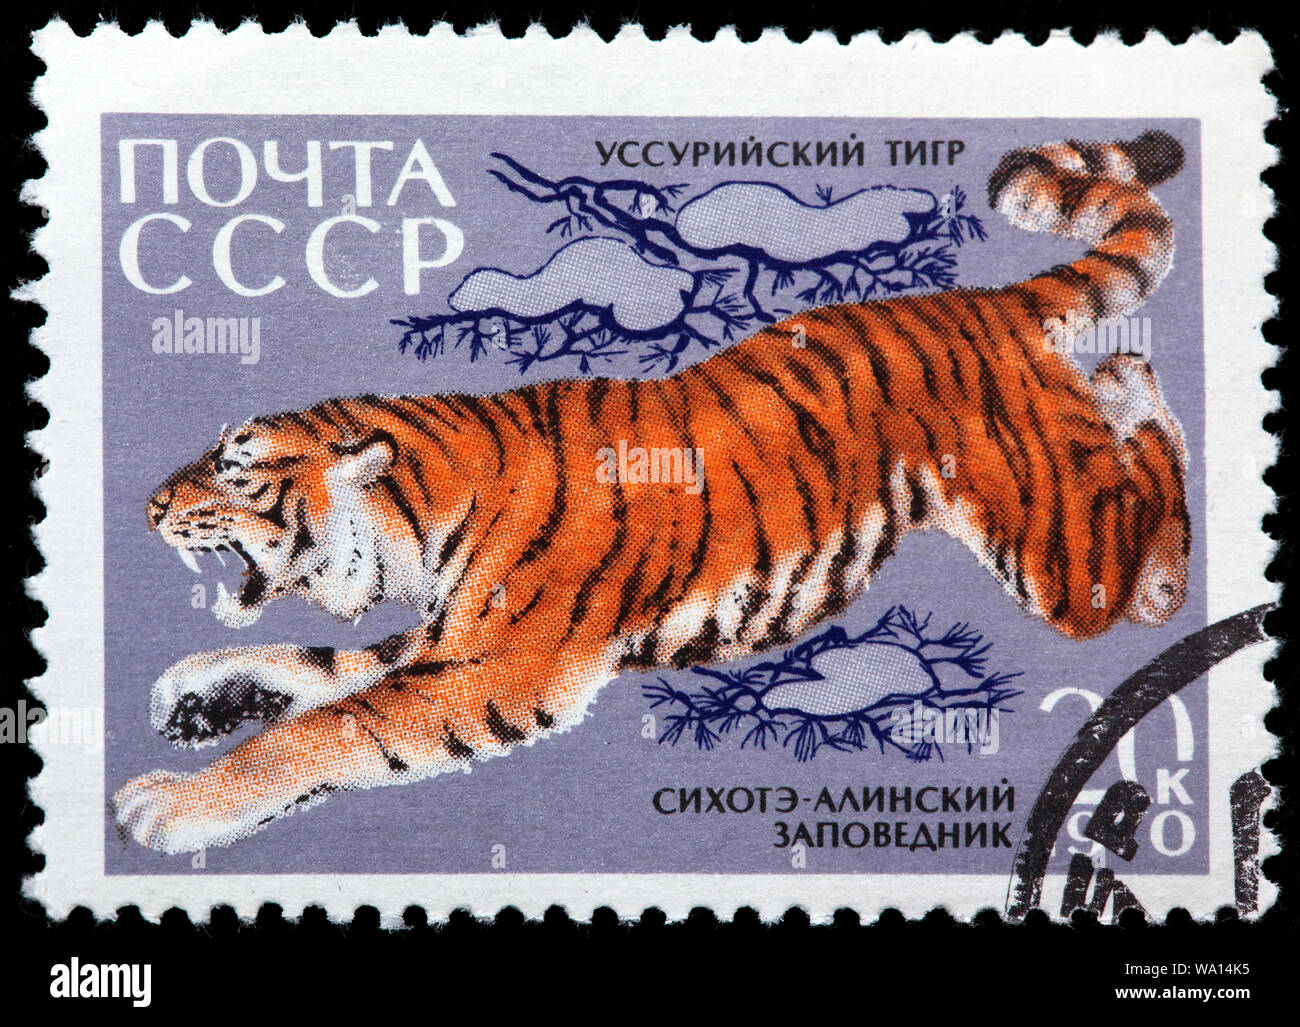 Siberian Tiger, Panthera tigris altaica, Fauna of Sikhote-Alin Nature Reserve, postage stamp, Russia, USSR, 1970 Stock Photo